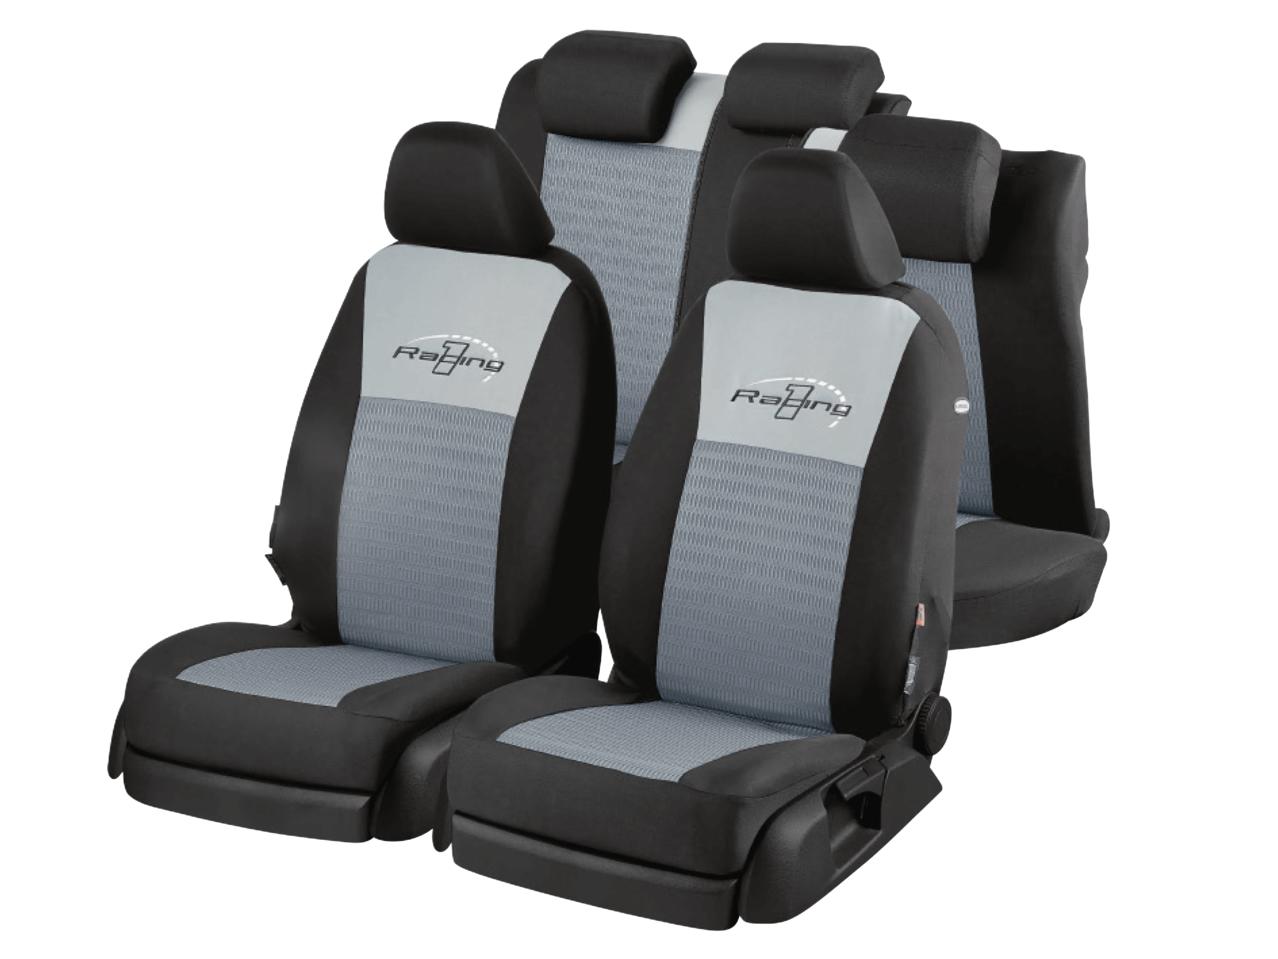 ULTIMATE SPEED(R) Car Seat Cover Set